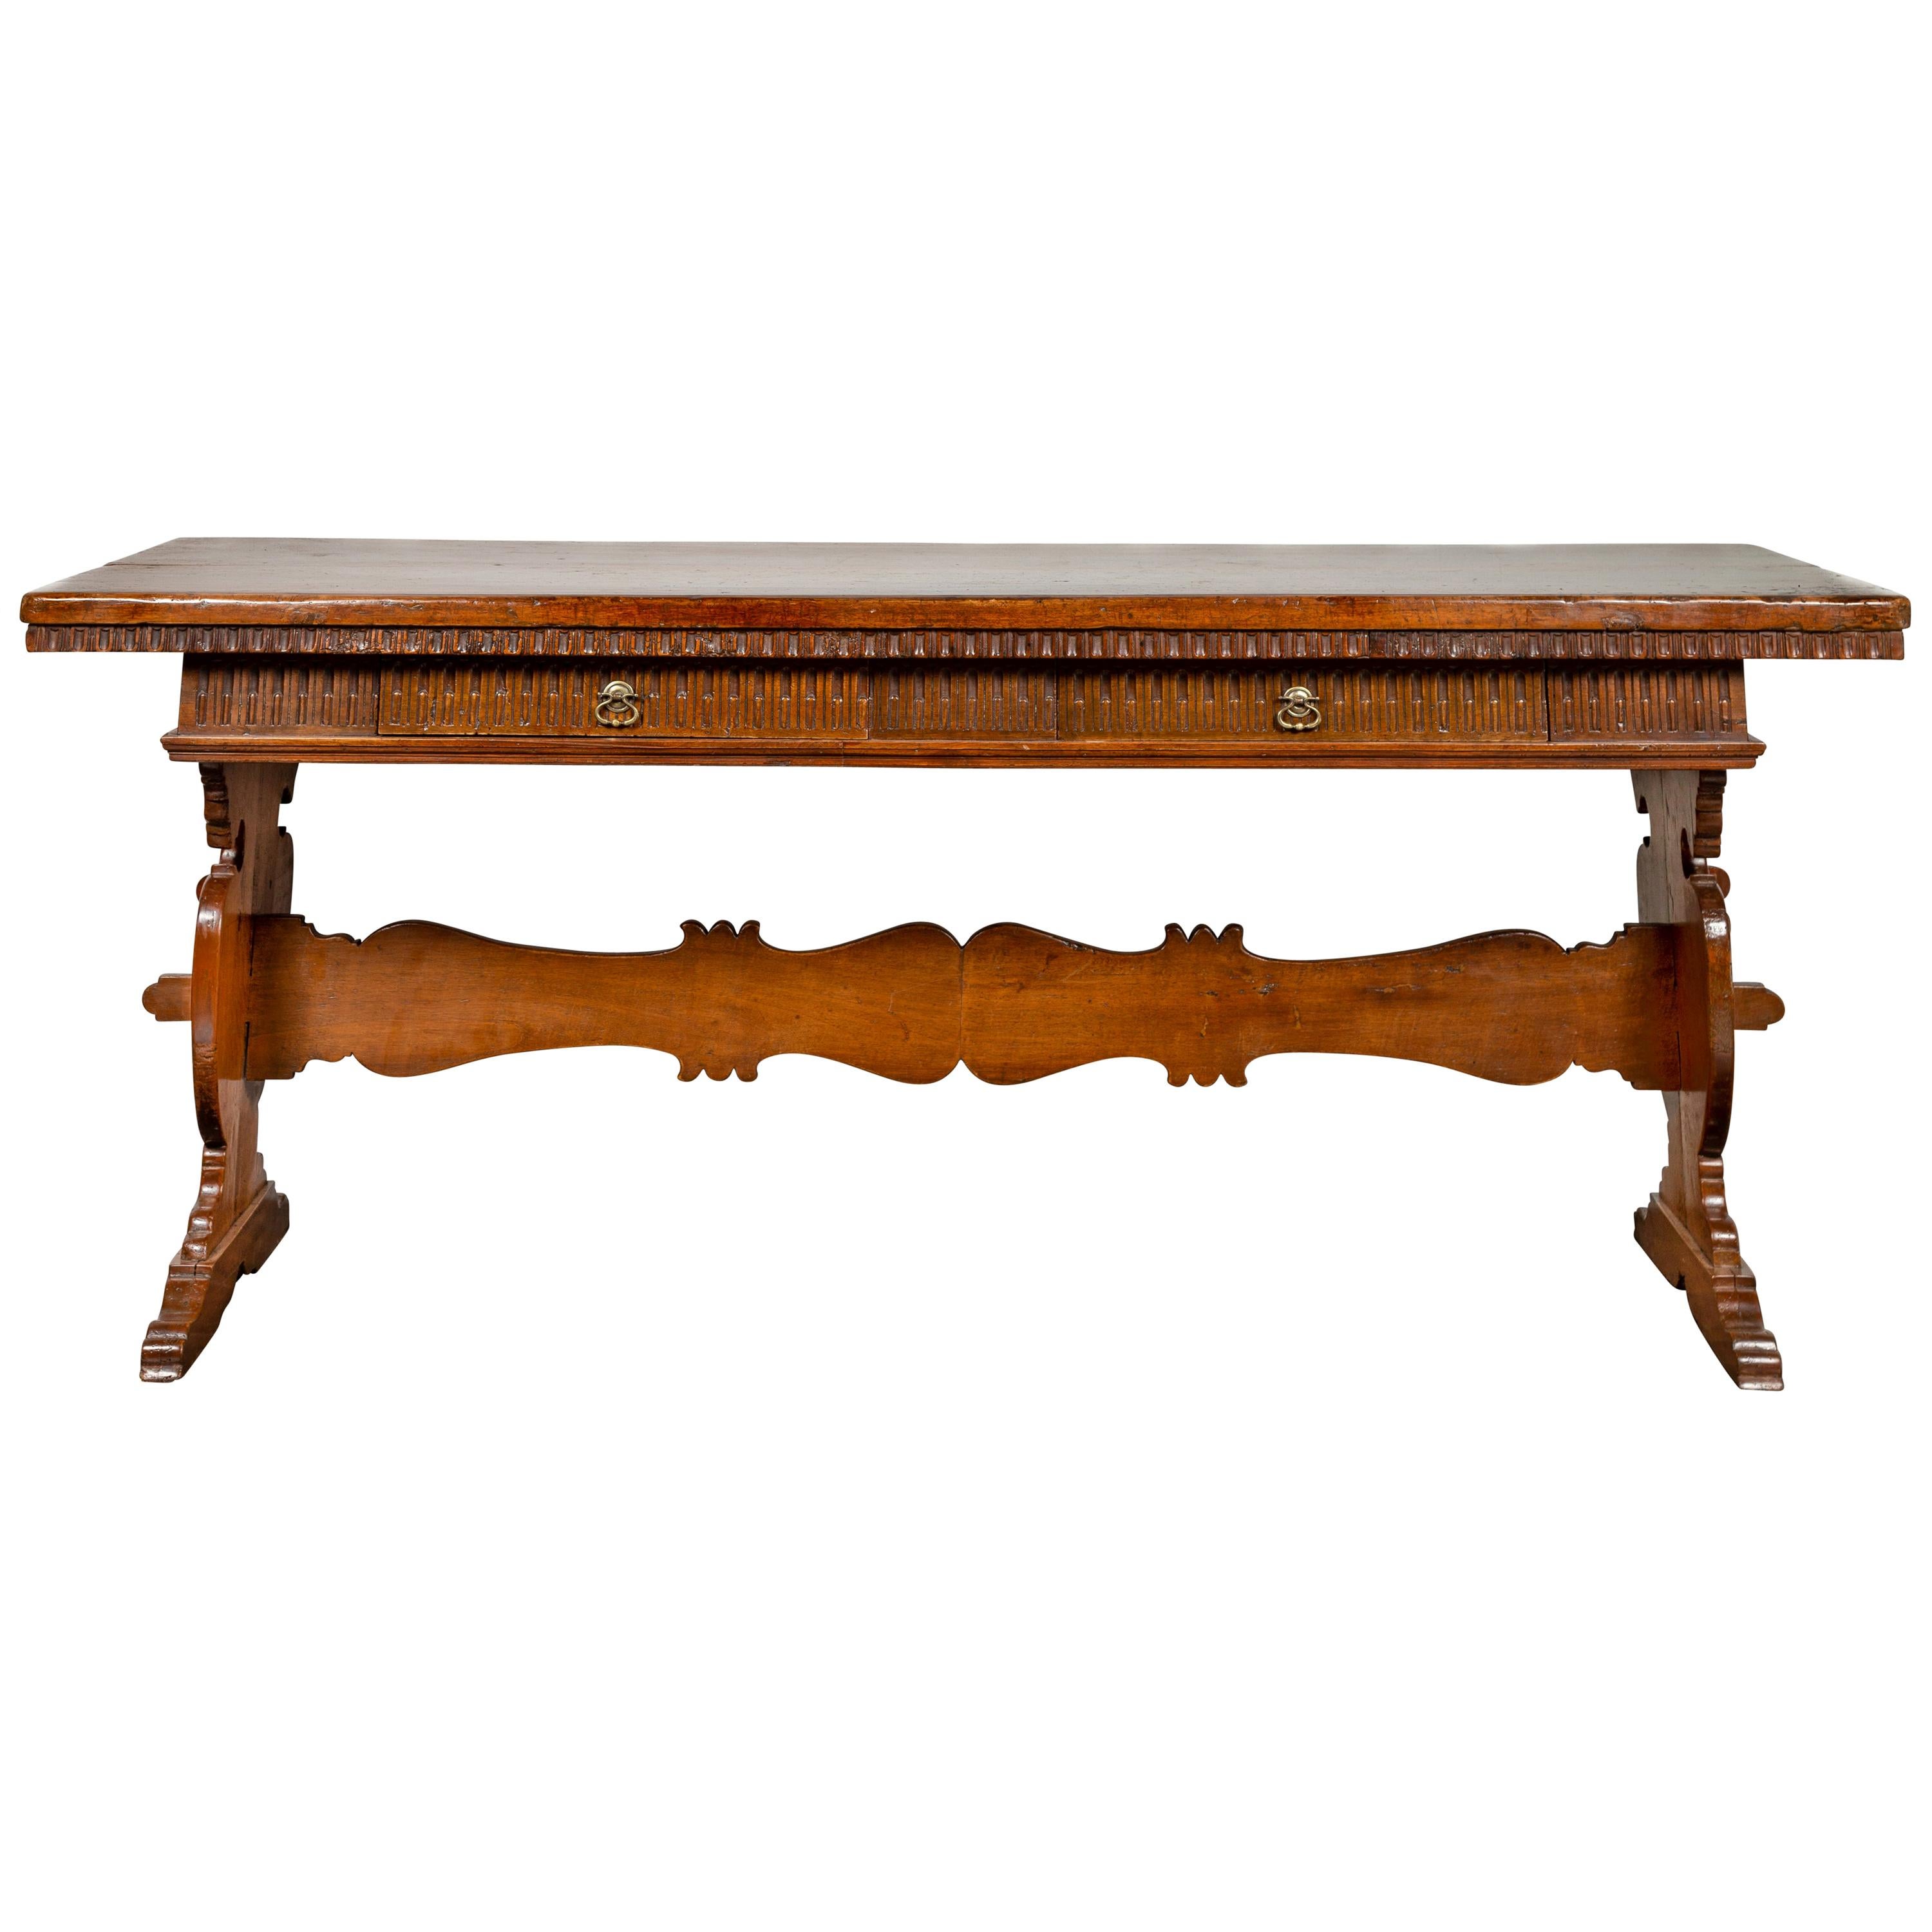 Italian 1840s Walnut Trestle Table with Two Drawers and Fluted Accents